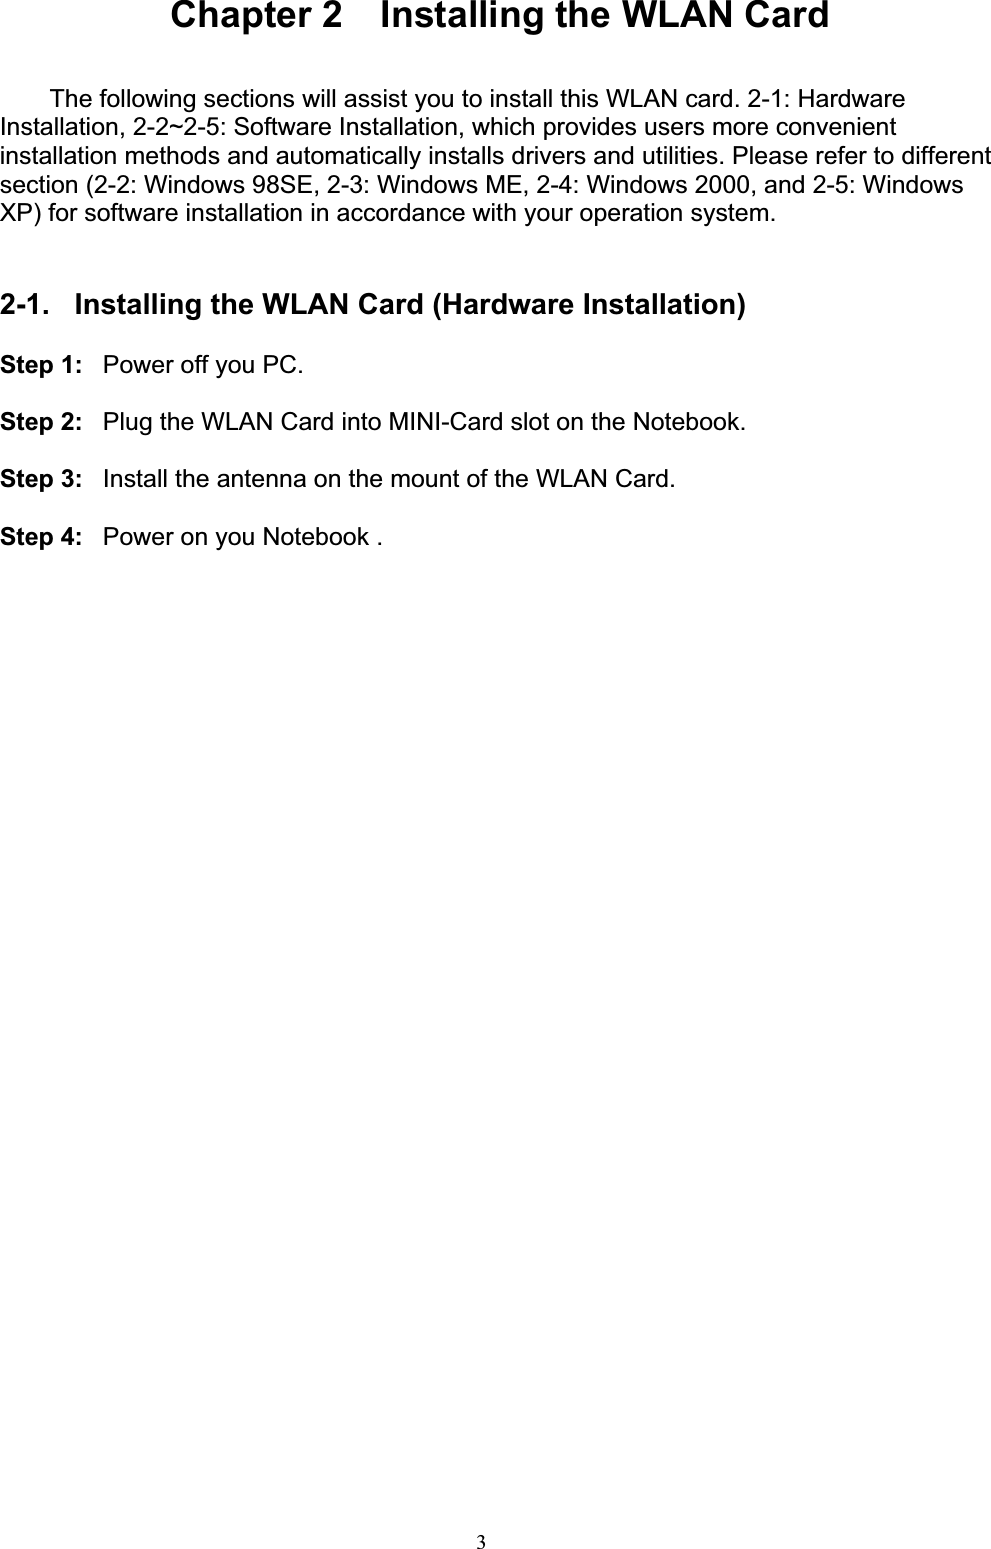 3Chapter 2    Installing the WLAN Card The following sections will assist you to install this WLAN card. 2-1: Hardware Installation, 2-2~2-5: Software Installation, which provides users more convenient installation methods and automatically installs drivers and utilities. Please refer to different section (2-2: Windows 98SE, 2-3: Windows ME, 2-4: Windows 2000, and 2-5: Windows XP) for software installation in accordance with your operation system. 2-1.  Installing the WLAN Card (Hardware Installation) Step 1:  Power off you PC. Step 2:  Plug the WLAN Card into MINI-Card slot on the Notebook. Step 3:  Install the antenna on the mount of the WLAN Card. Step 4:  Power on you Notebook .